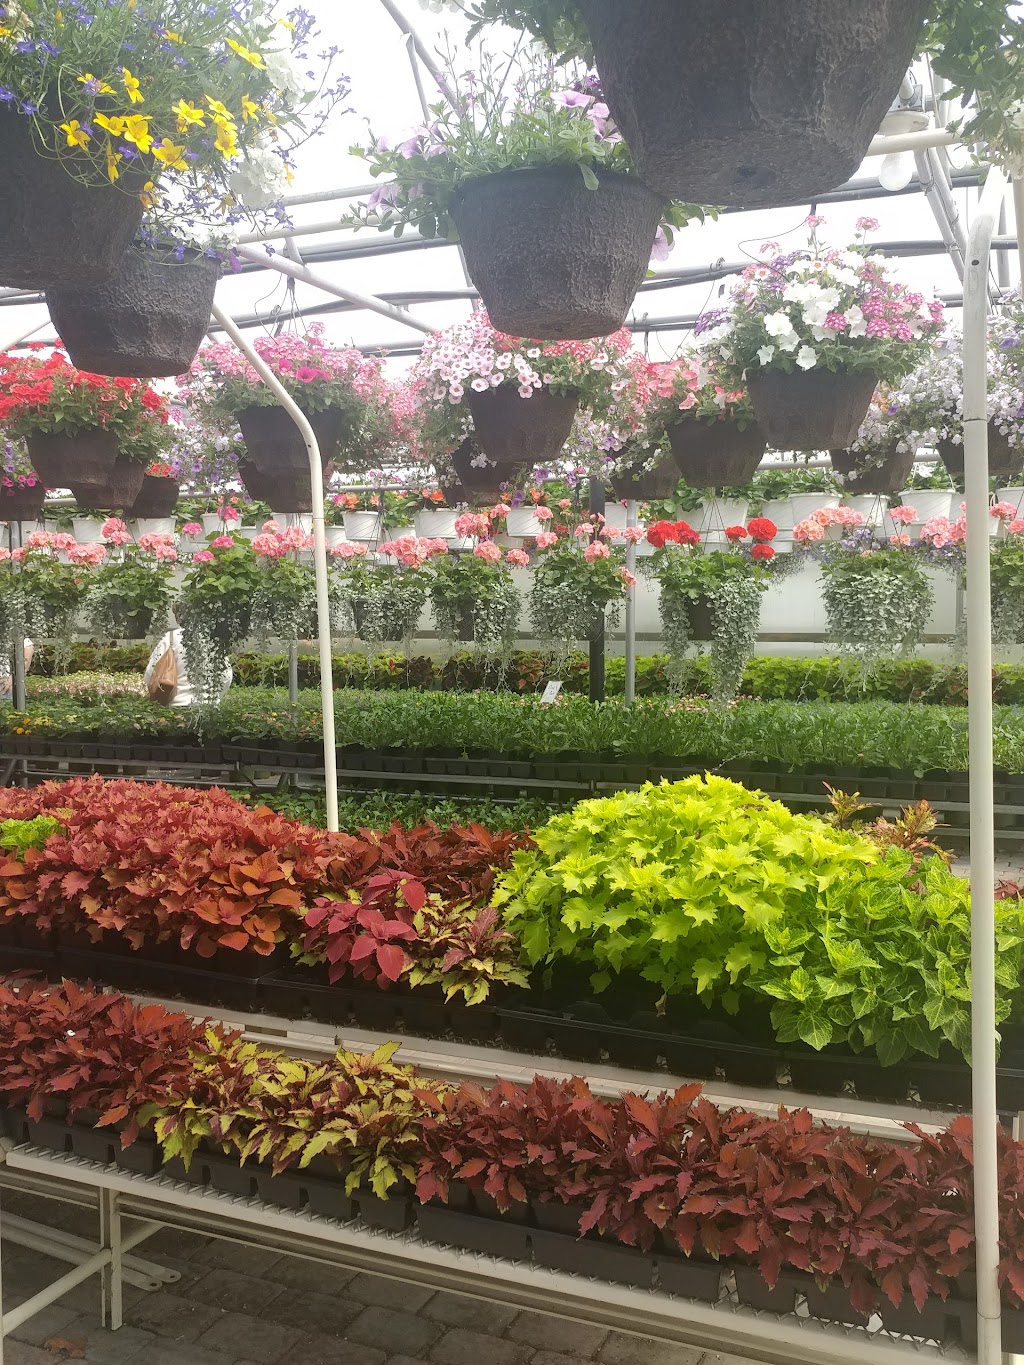 Cathys Flower Stand | 799 Canal Rd, Mt Sinai, NY 11766 | Phone: (631) 331-8462